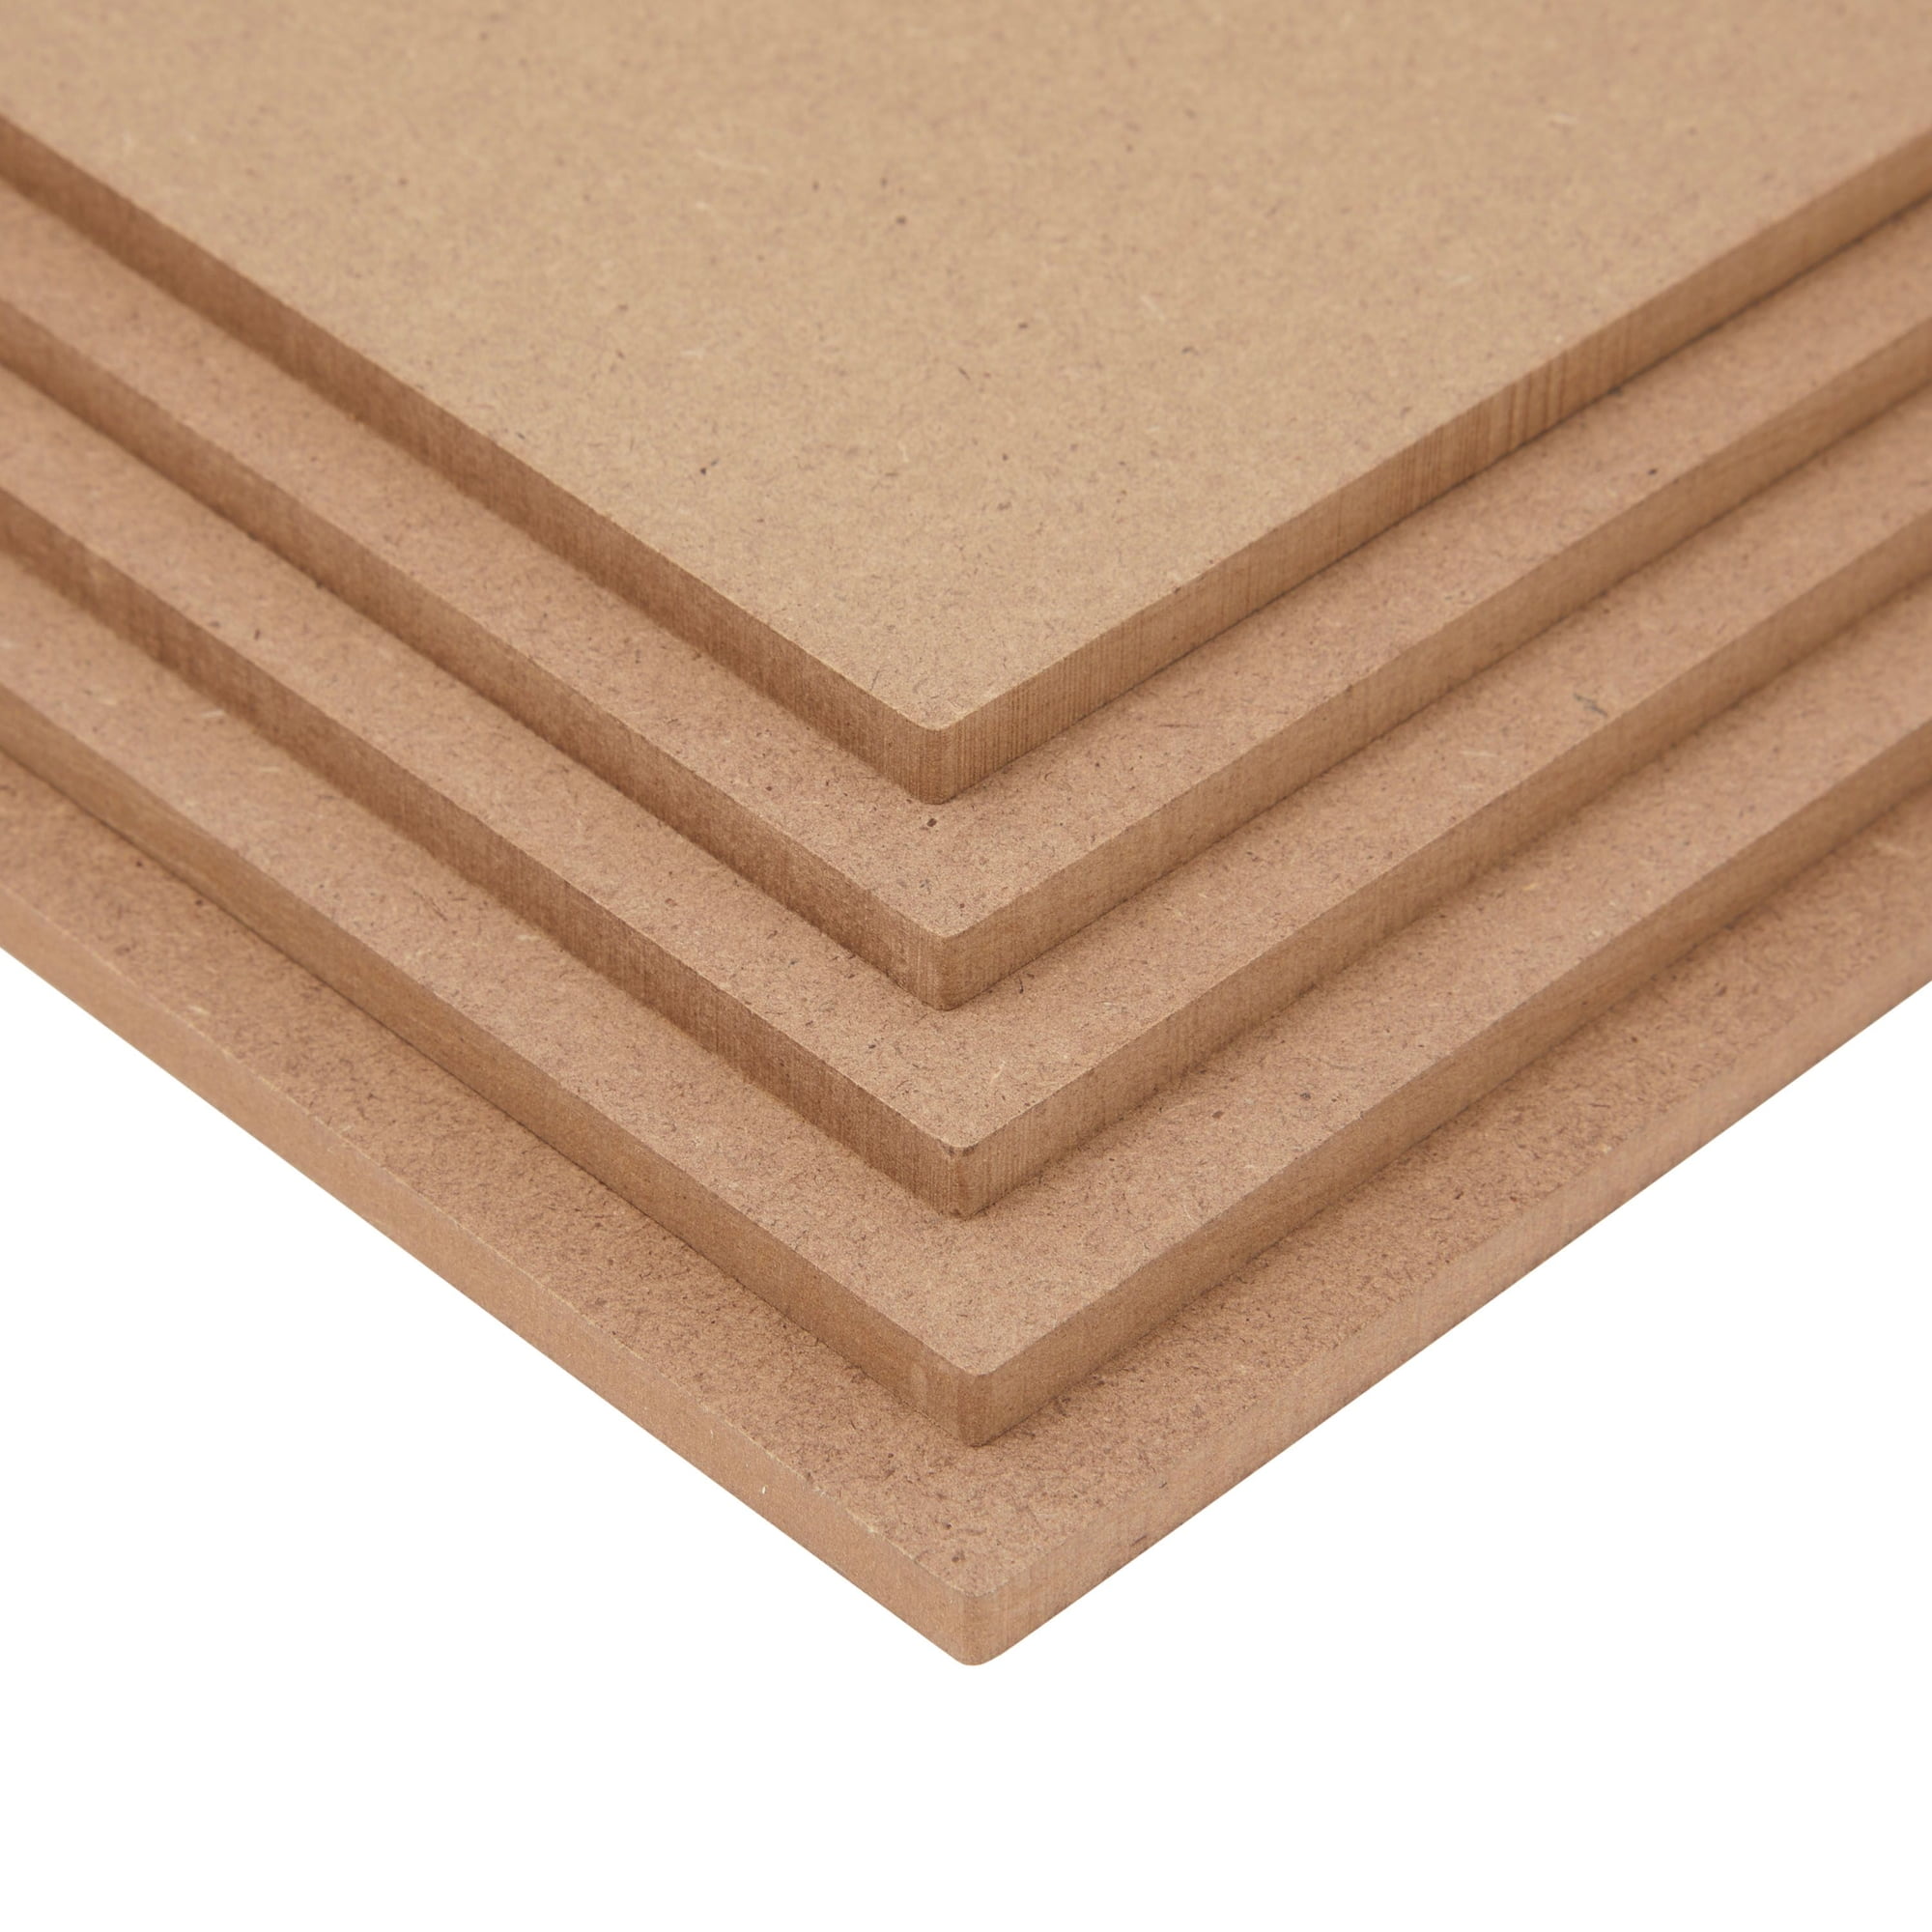 20 Pack 12x12 MDF Boards, 1/4 Thick Chipboard Sheets for DIY Arts